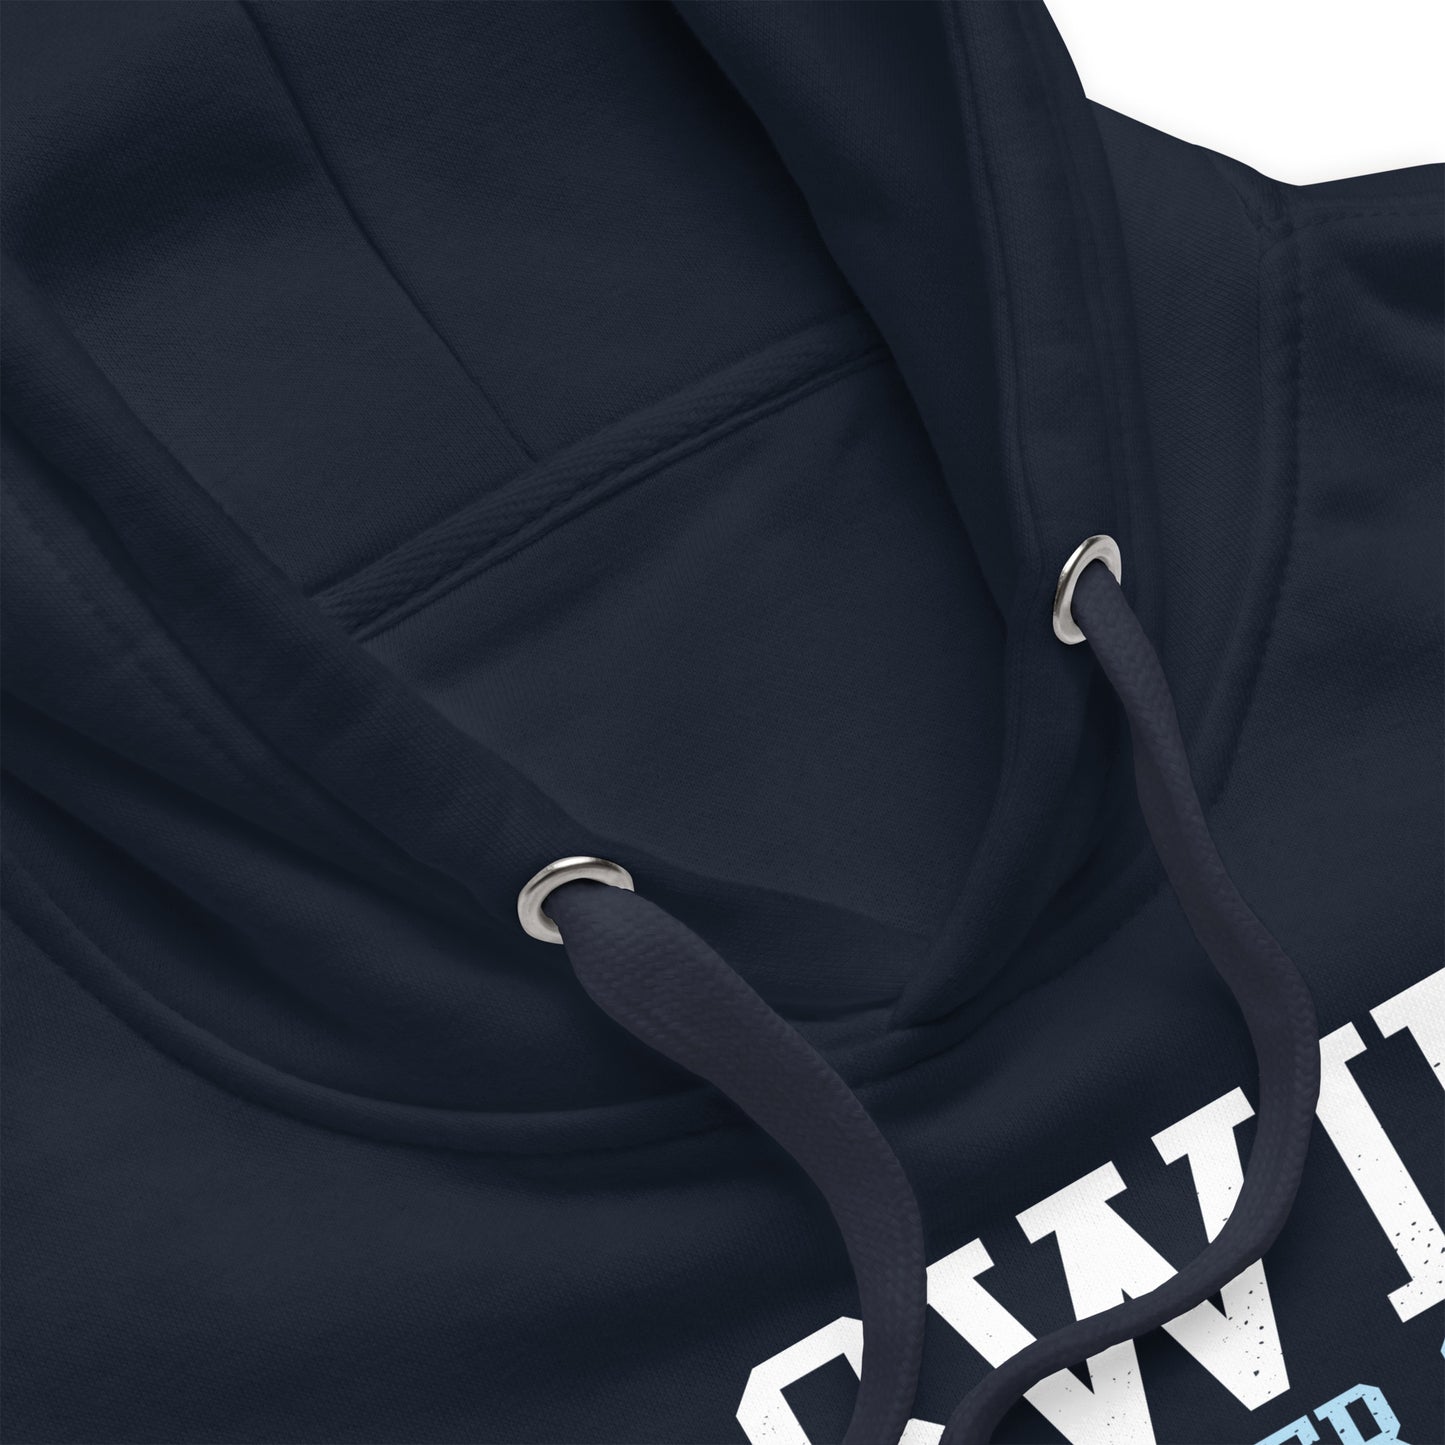 Swimmer Premium Hoodie I Swim If You Ever See Me Running Funny - TrendySwimmer